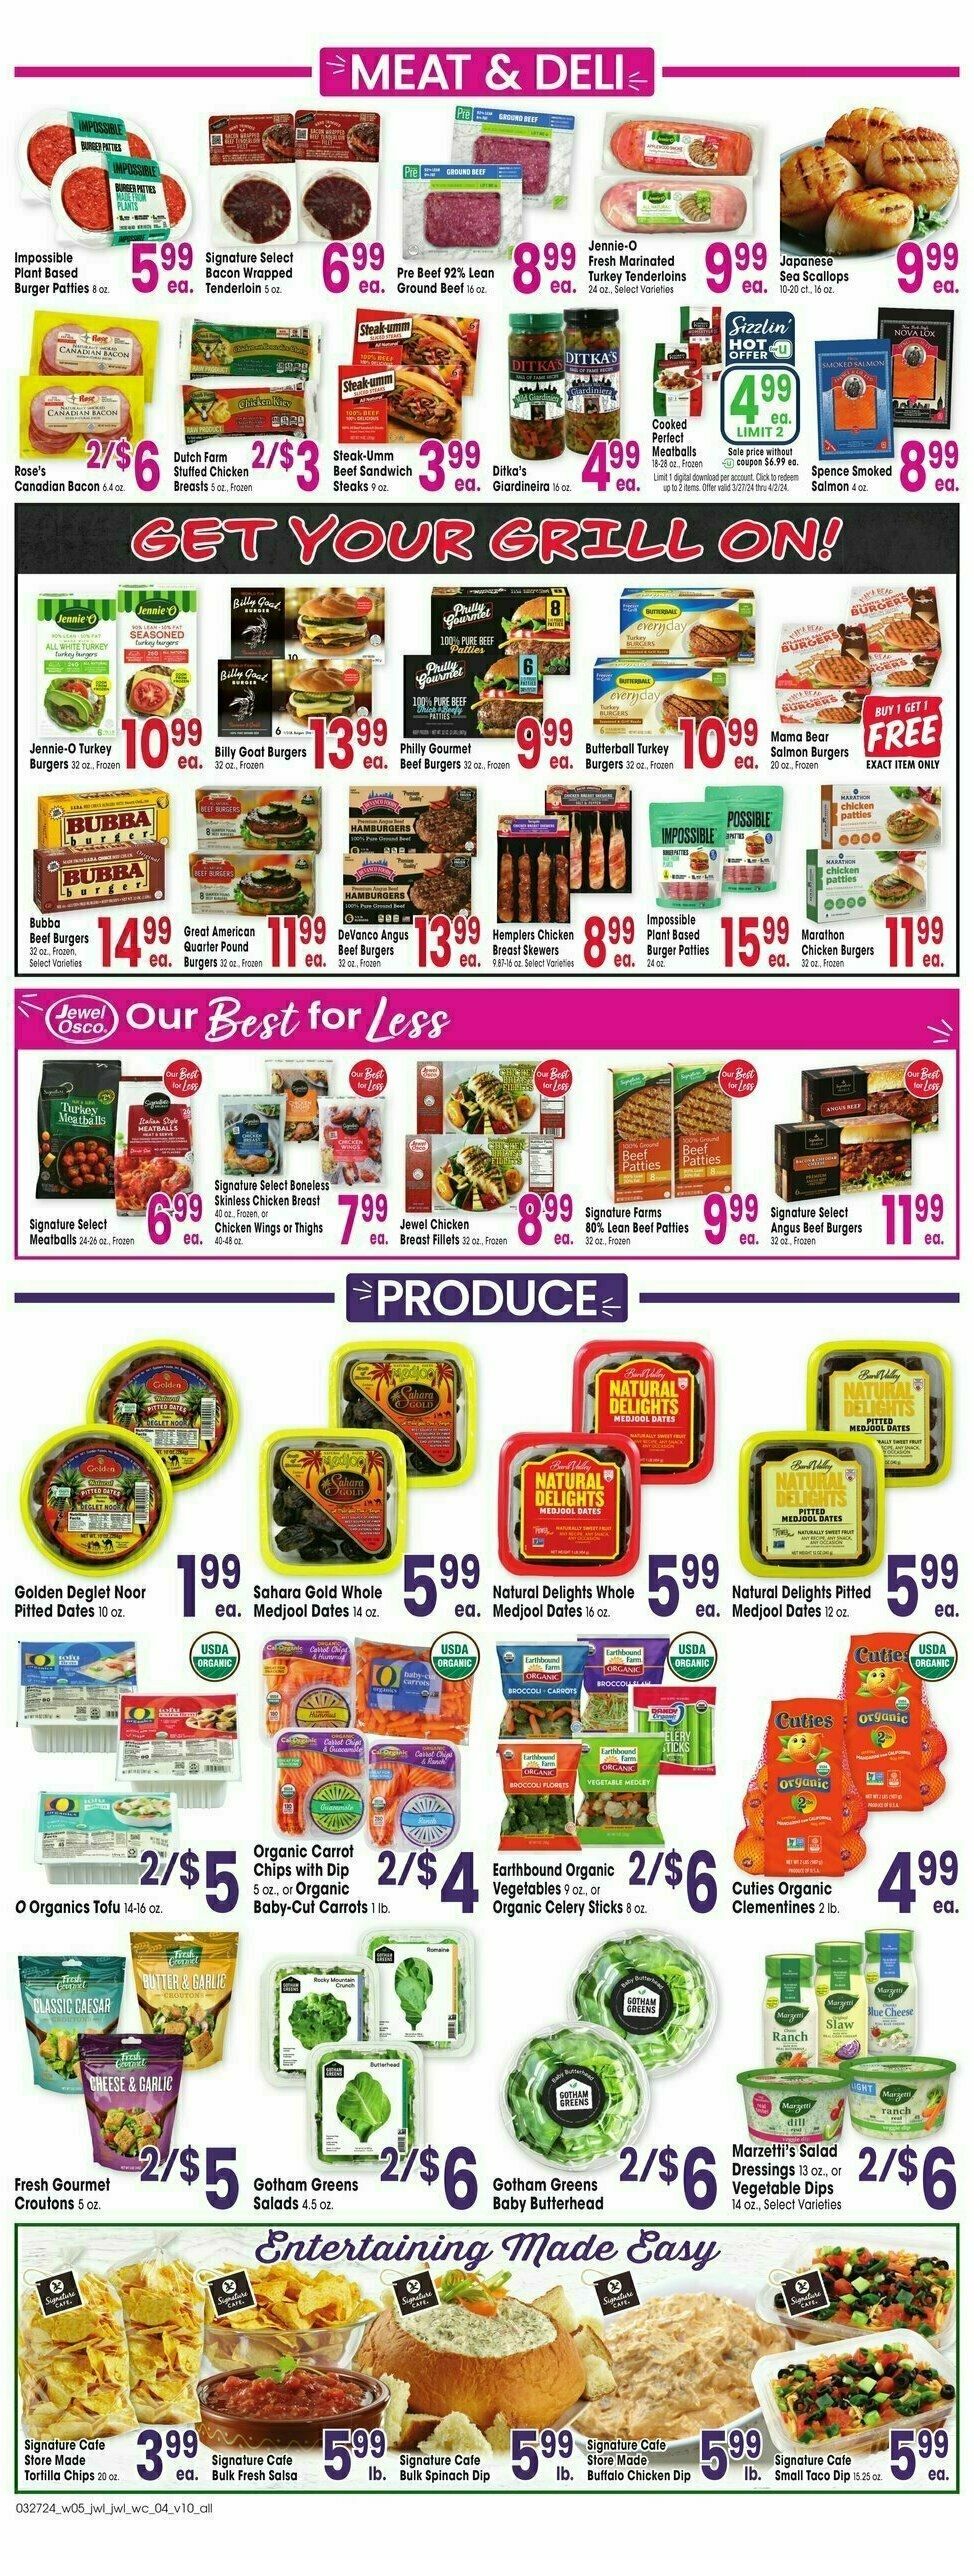 Jewel Osco Weekly Ad from March 27